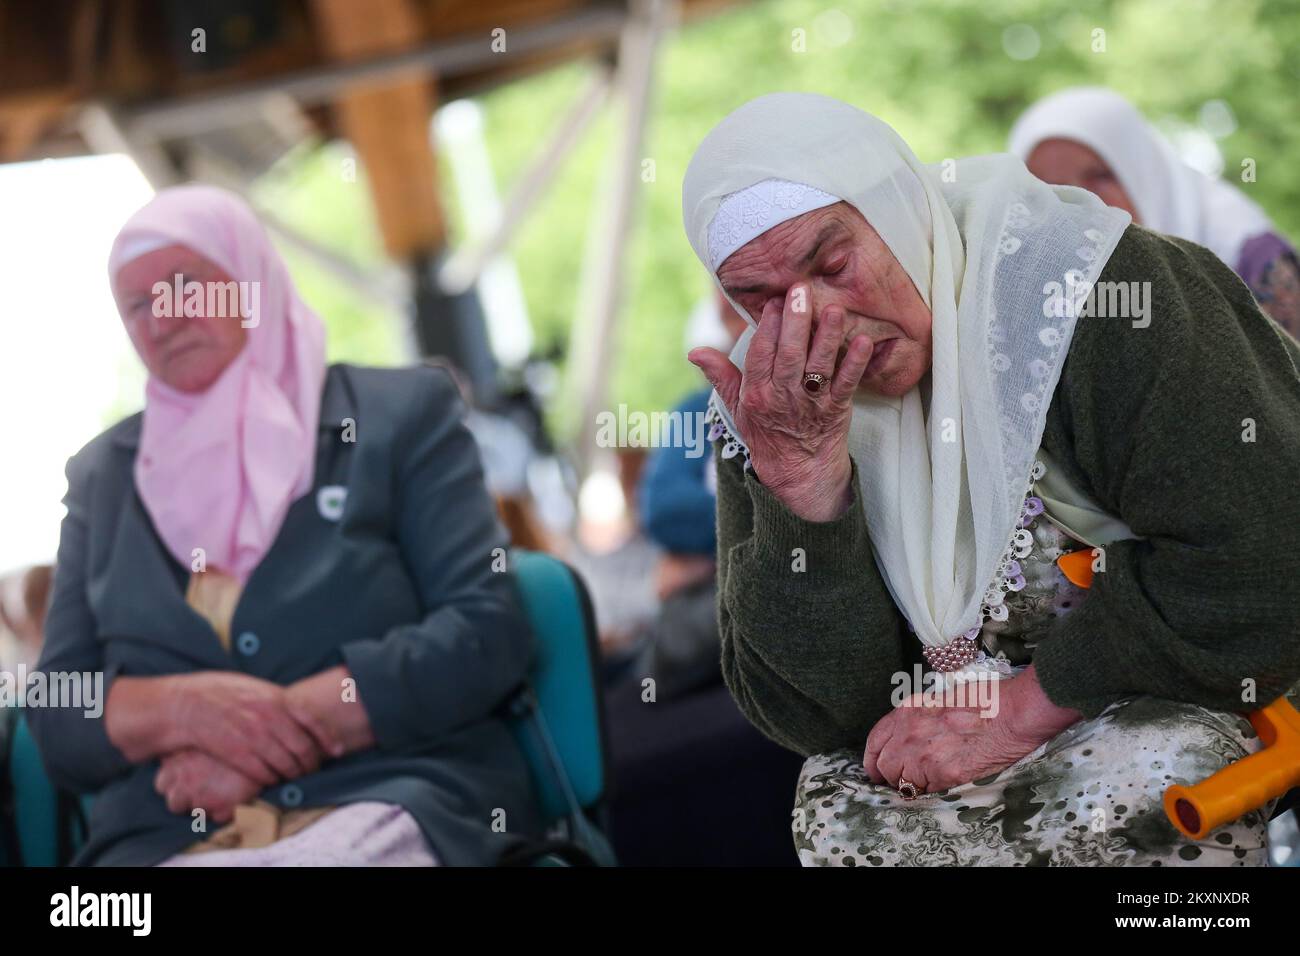 Mothers of Srebrenica follow the verdict against Ratko Mladic, in Potocari, Bosnia and Herzegovina ,on June 8, 2021 .The commander, the Bosnian Serb former general Ratko Mladic, was convicted in 2017 of genocide, crimes against humanity and war crimes. He was sentenced to life in prison. On Tuesday, that verdict was upheld by the International Criminal Tribunal for the Former Yugoslavia in The Hague, drawing a close to one of the darkest chapters in modern European history and ending a legal struggle that stretched back to 1995, when Mr. Mladic was first indicted.Now 79, Mr. Mladic has always Stock Photo